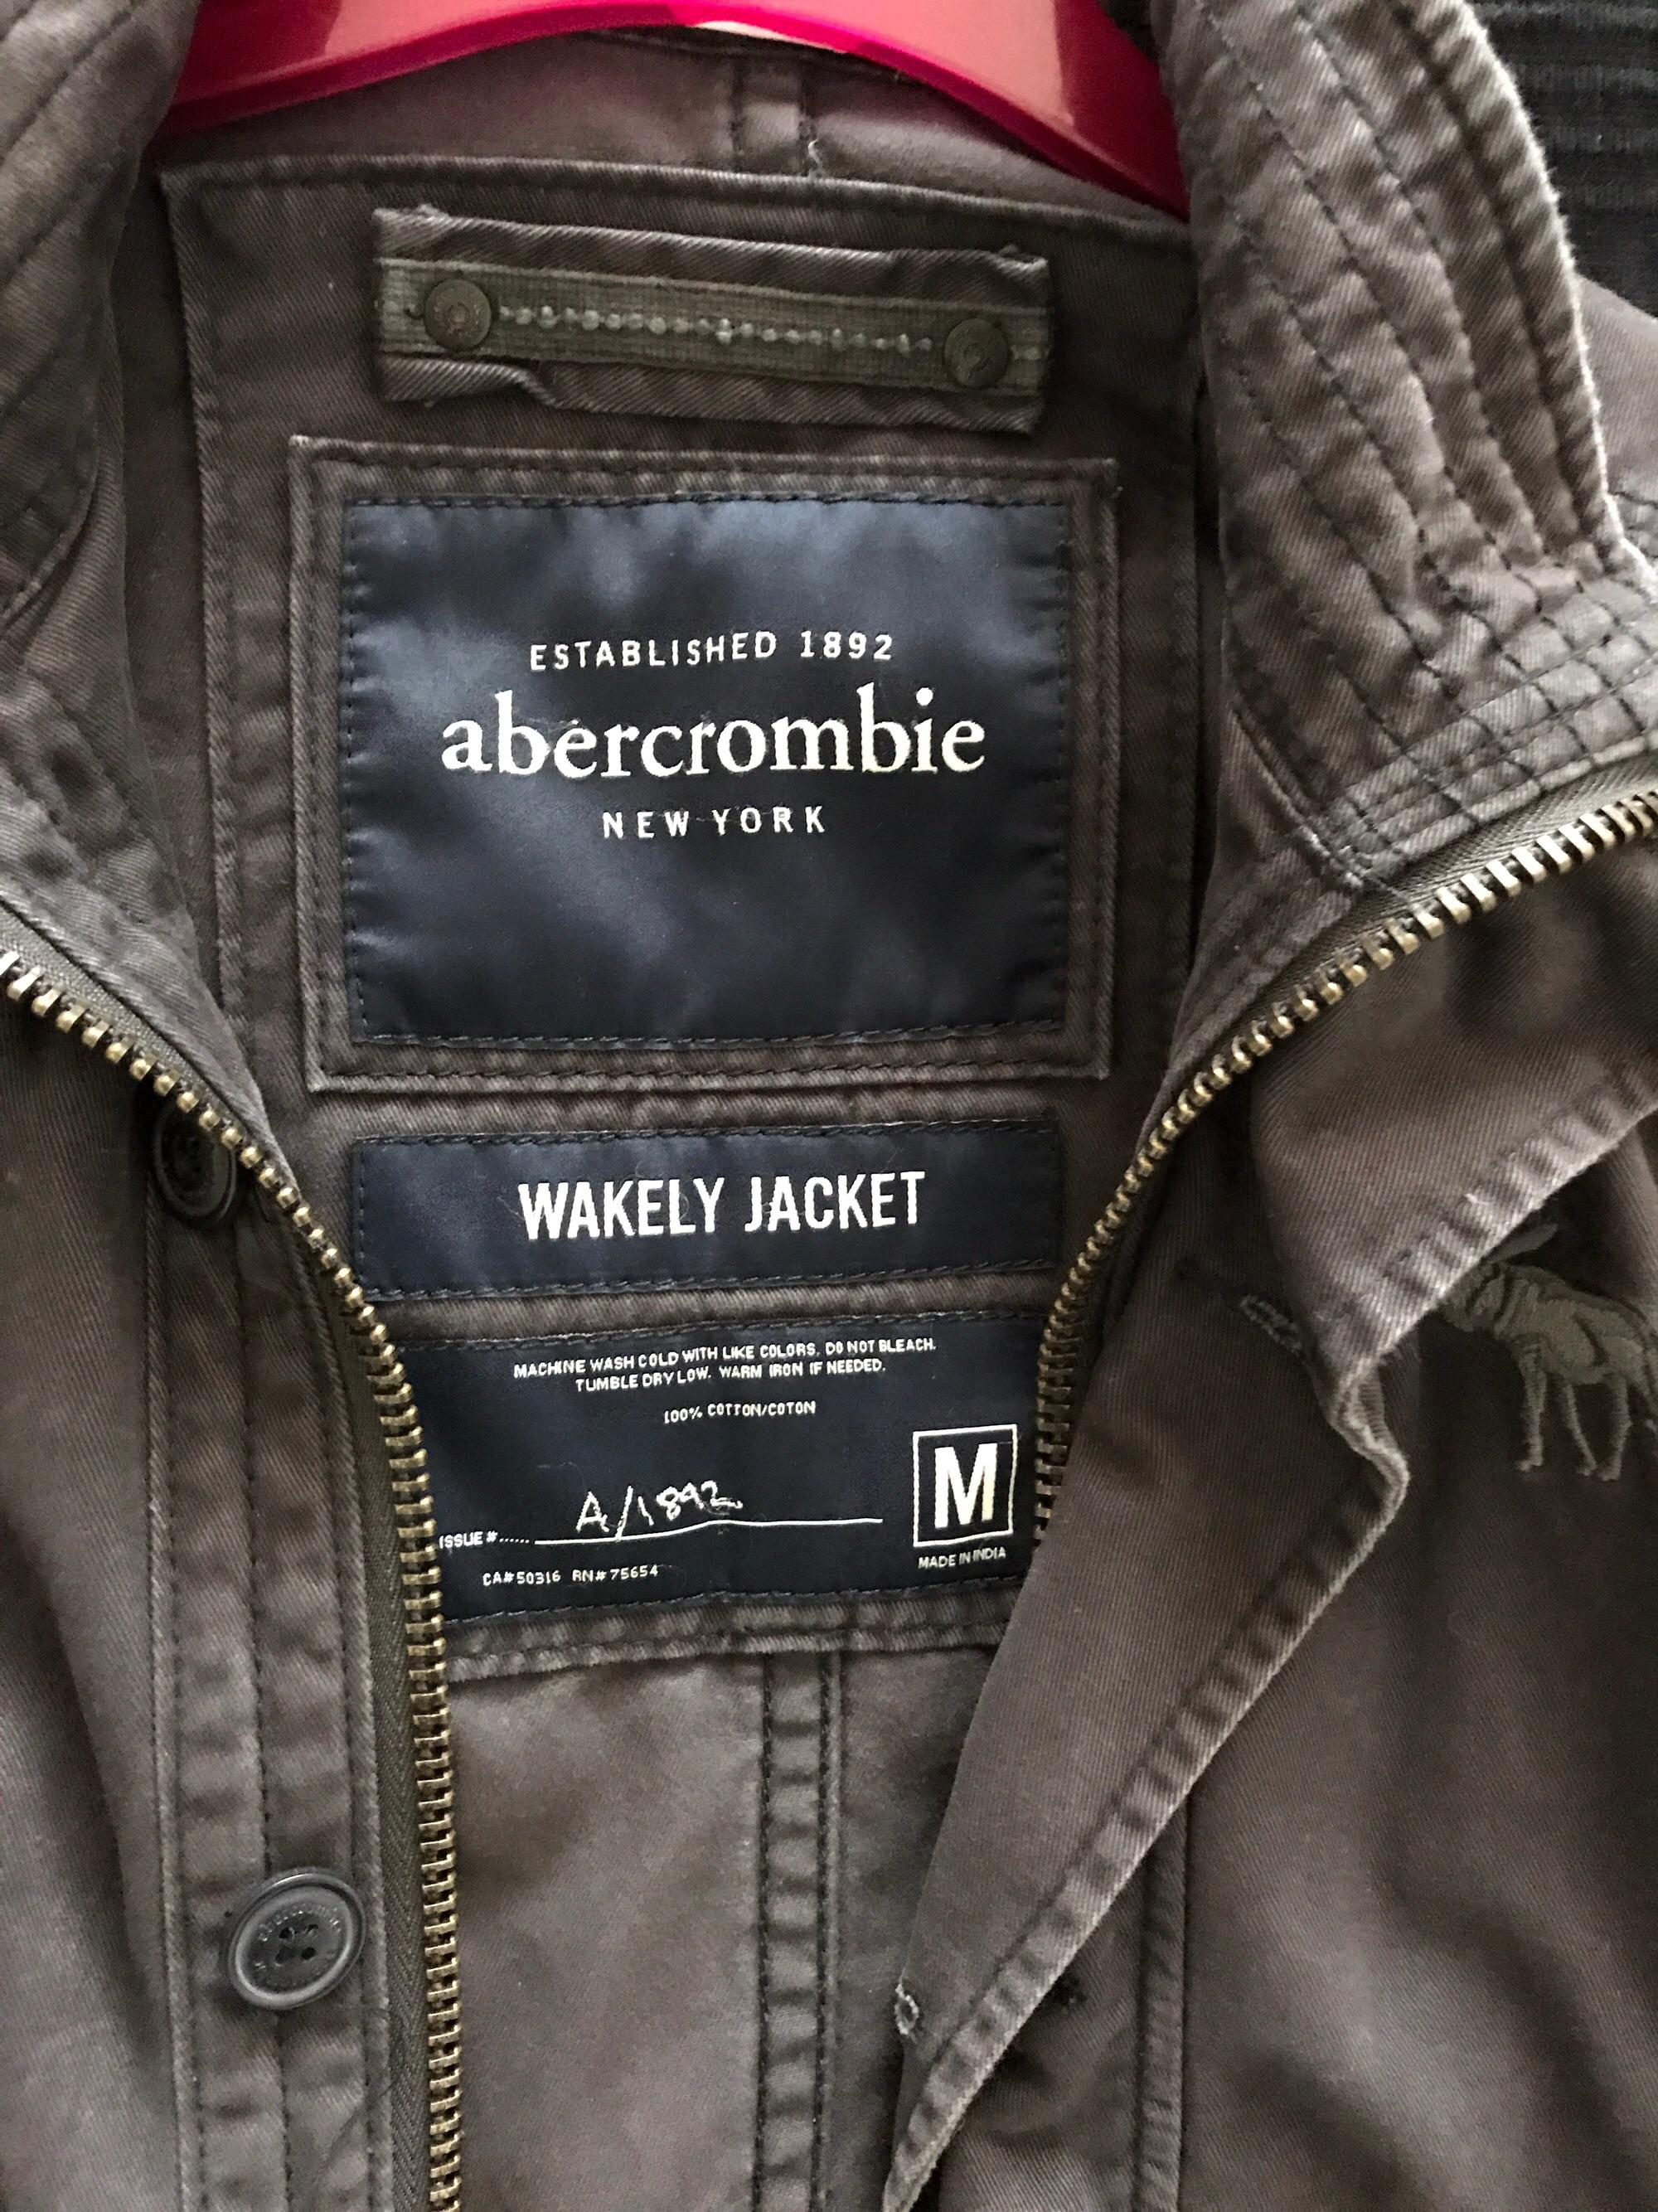 abercrombie and fitch wakely jacket